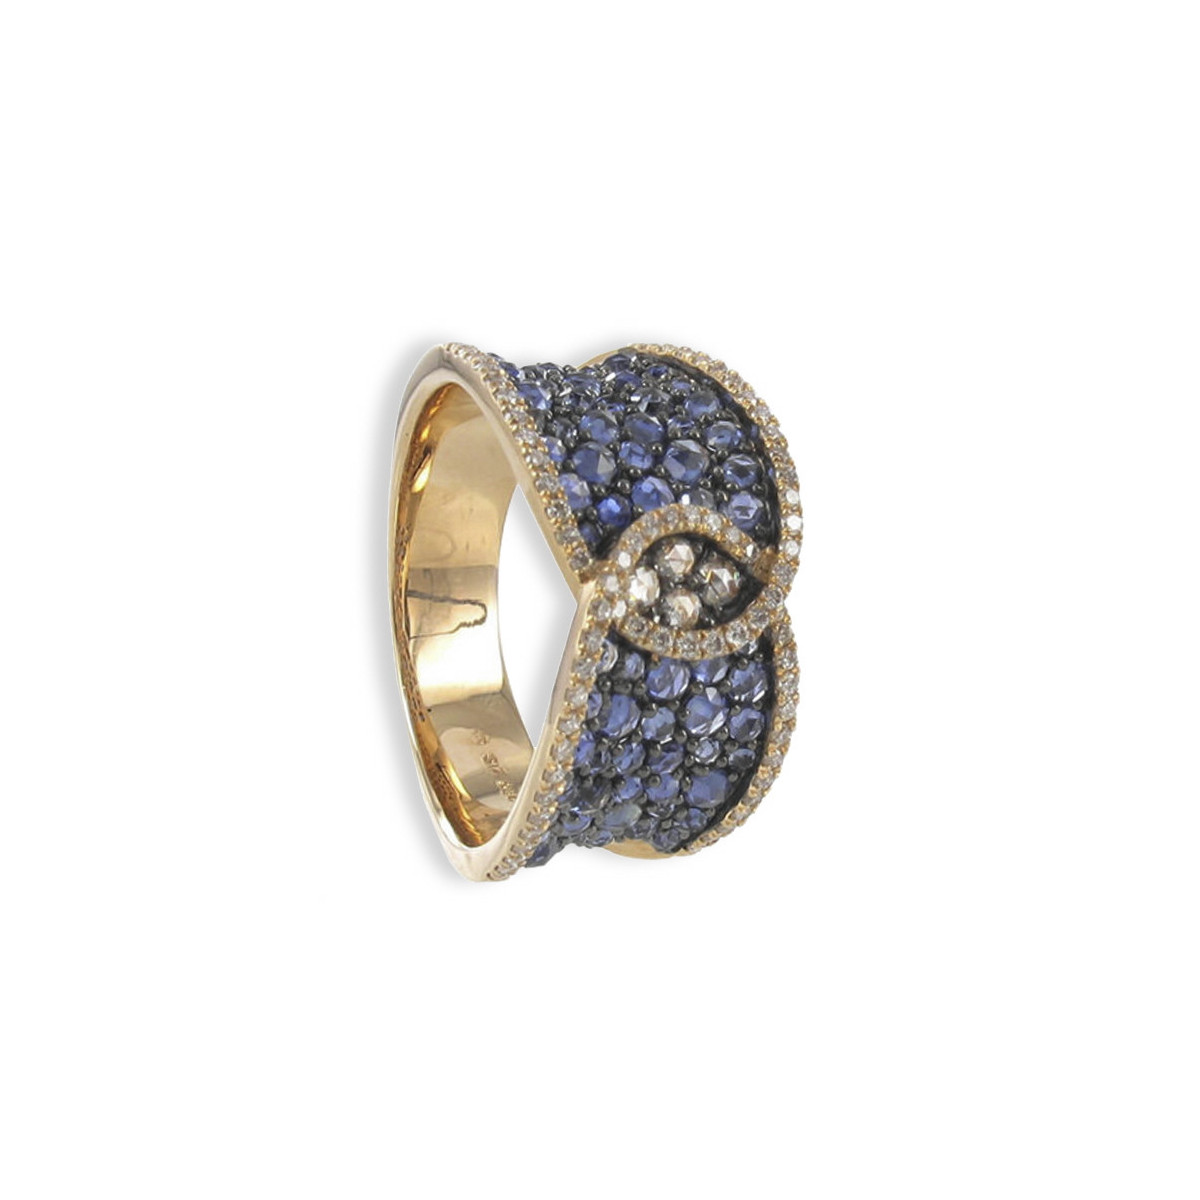 GOLD RING 66 SAPPHIRES AND DIAMONDS